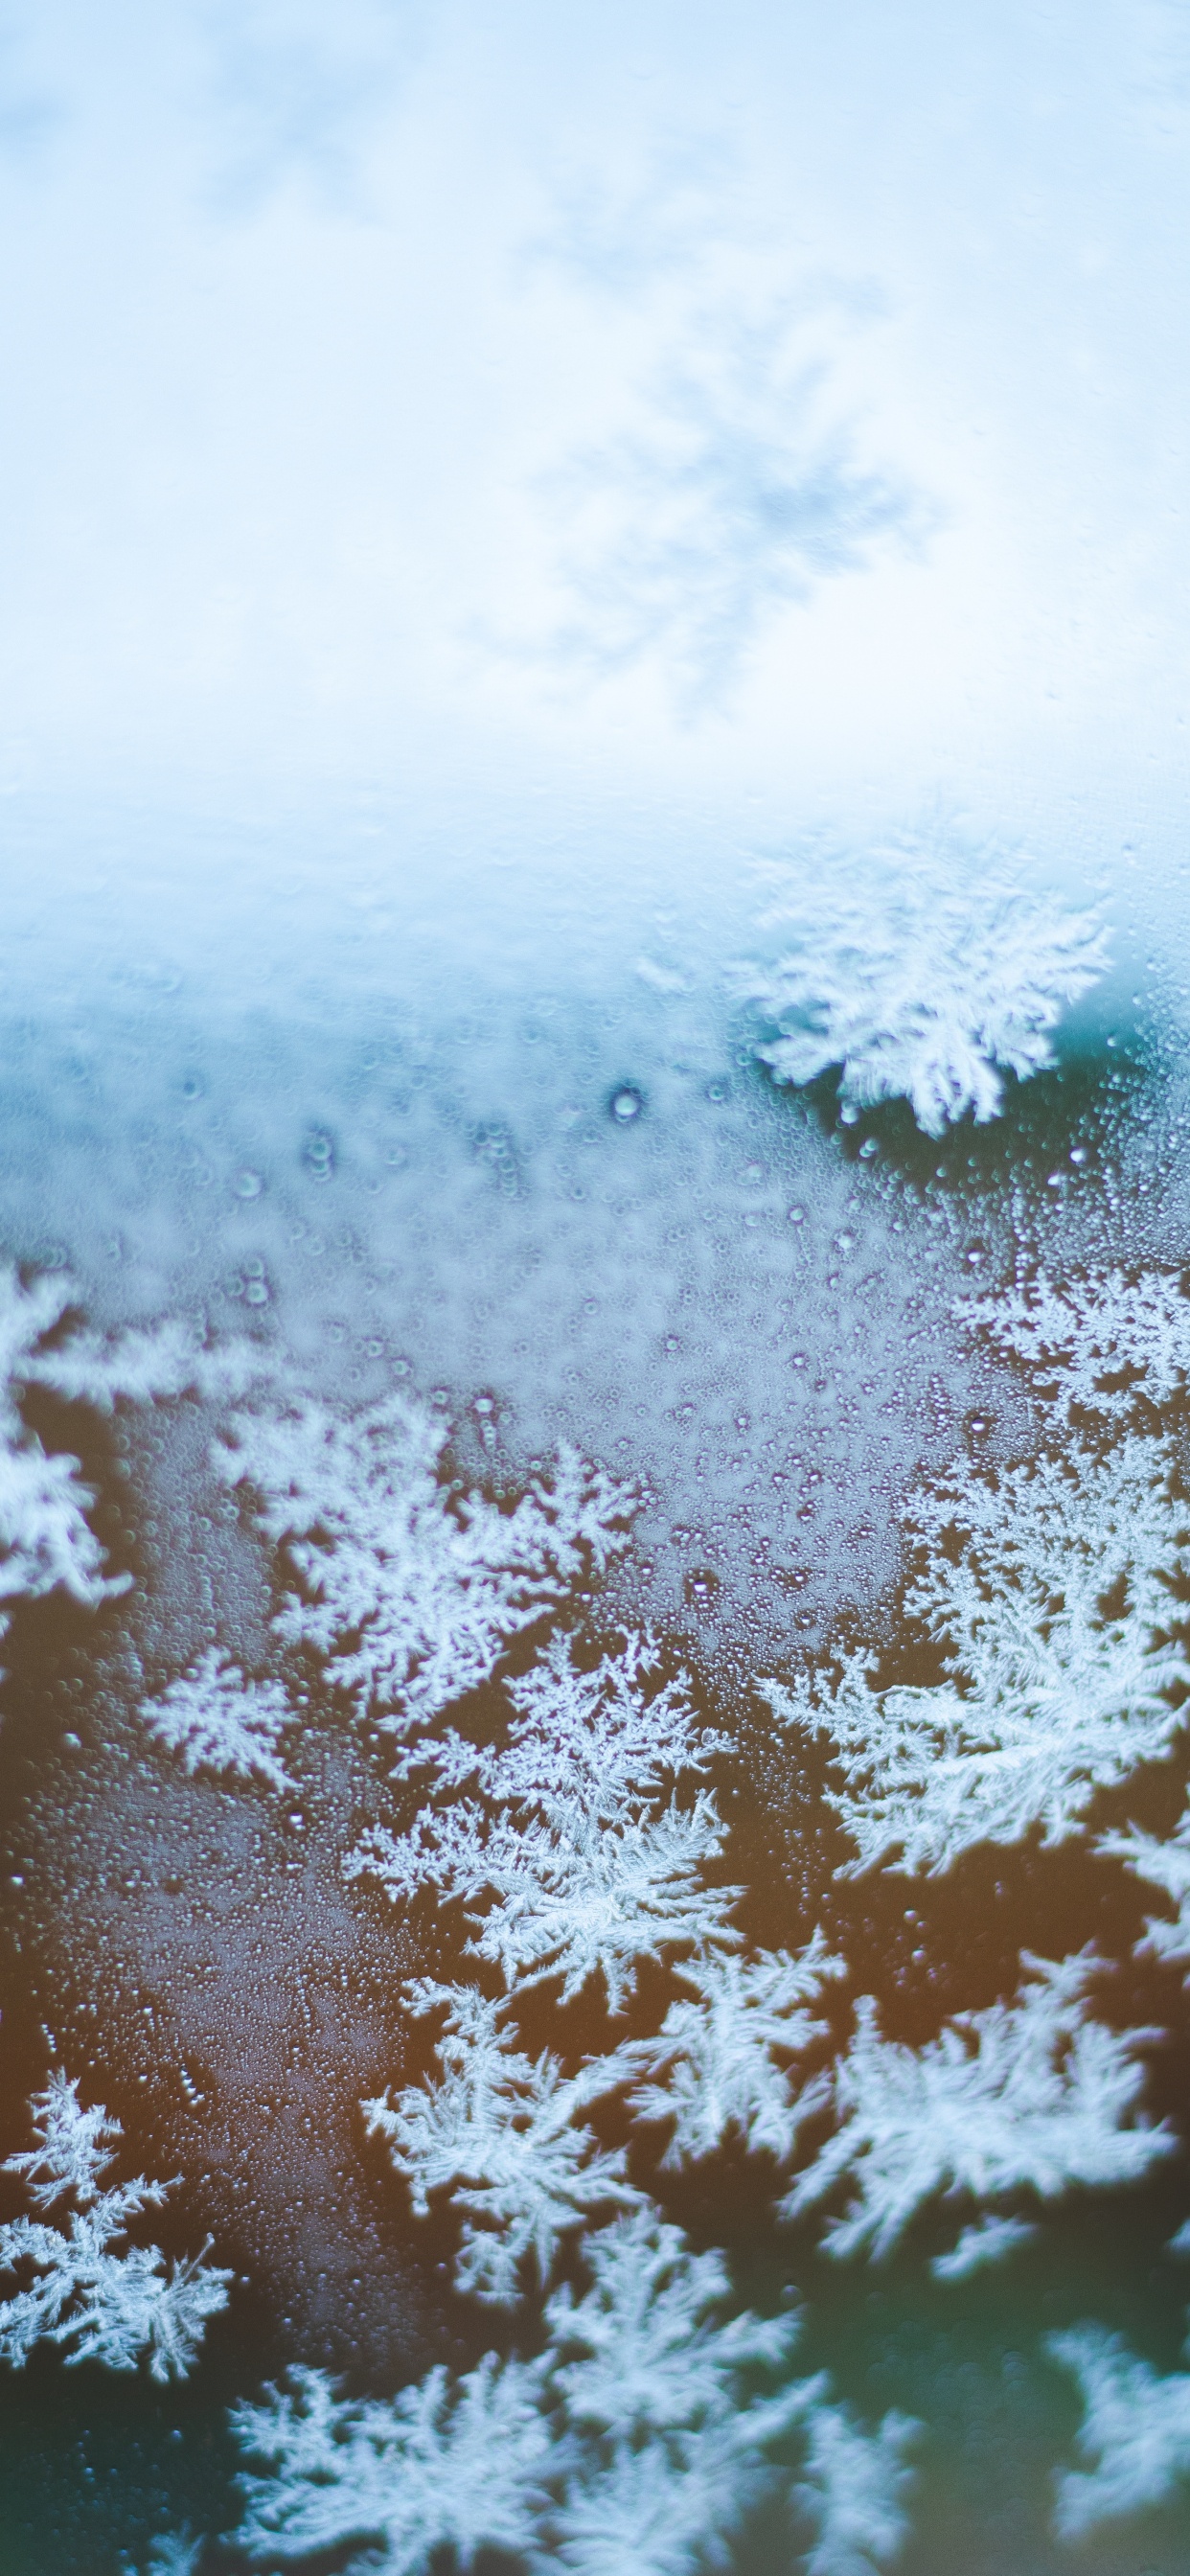 Snowflake, Freezing, Winter, Snow, Frost. Wallpaper in 1242x2688 Resolution